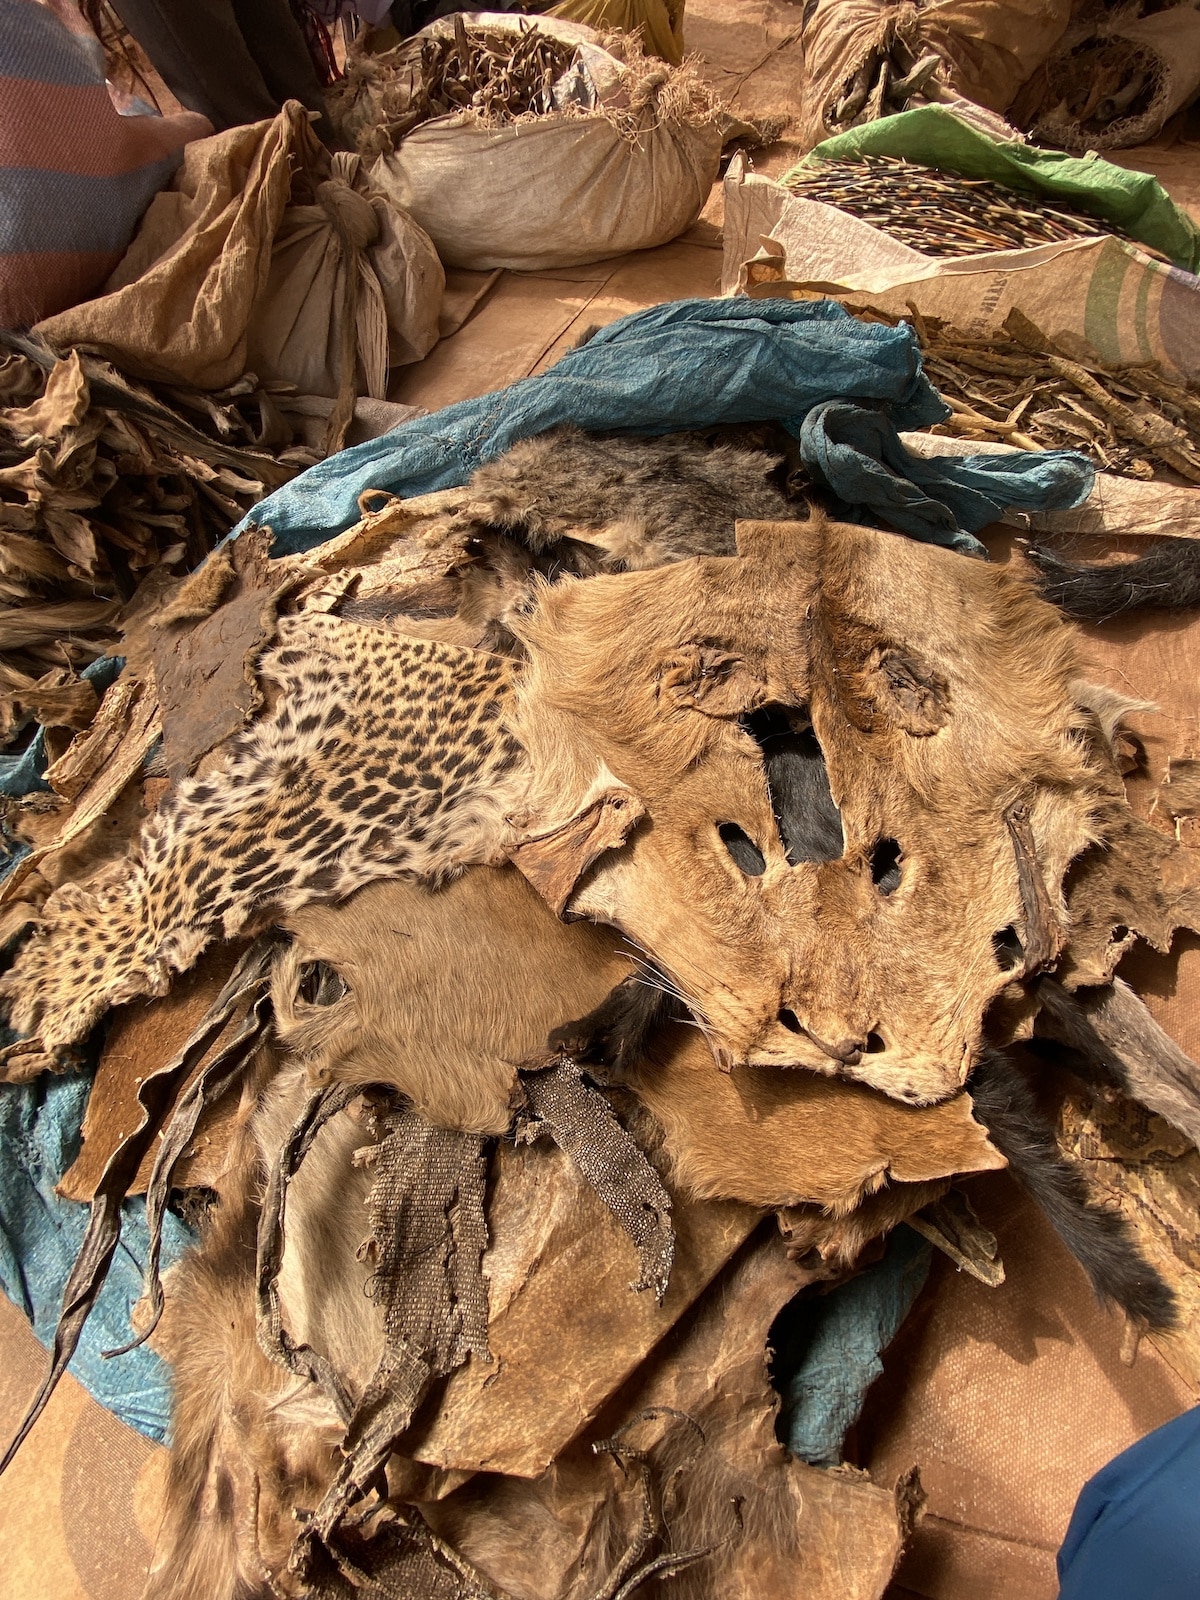 Wildlife Skins and Products in a Market in Ghana